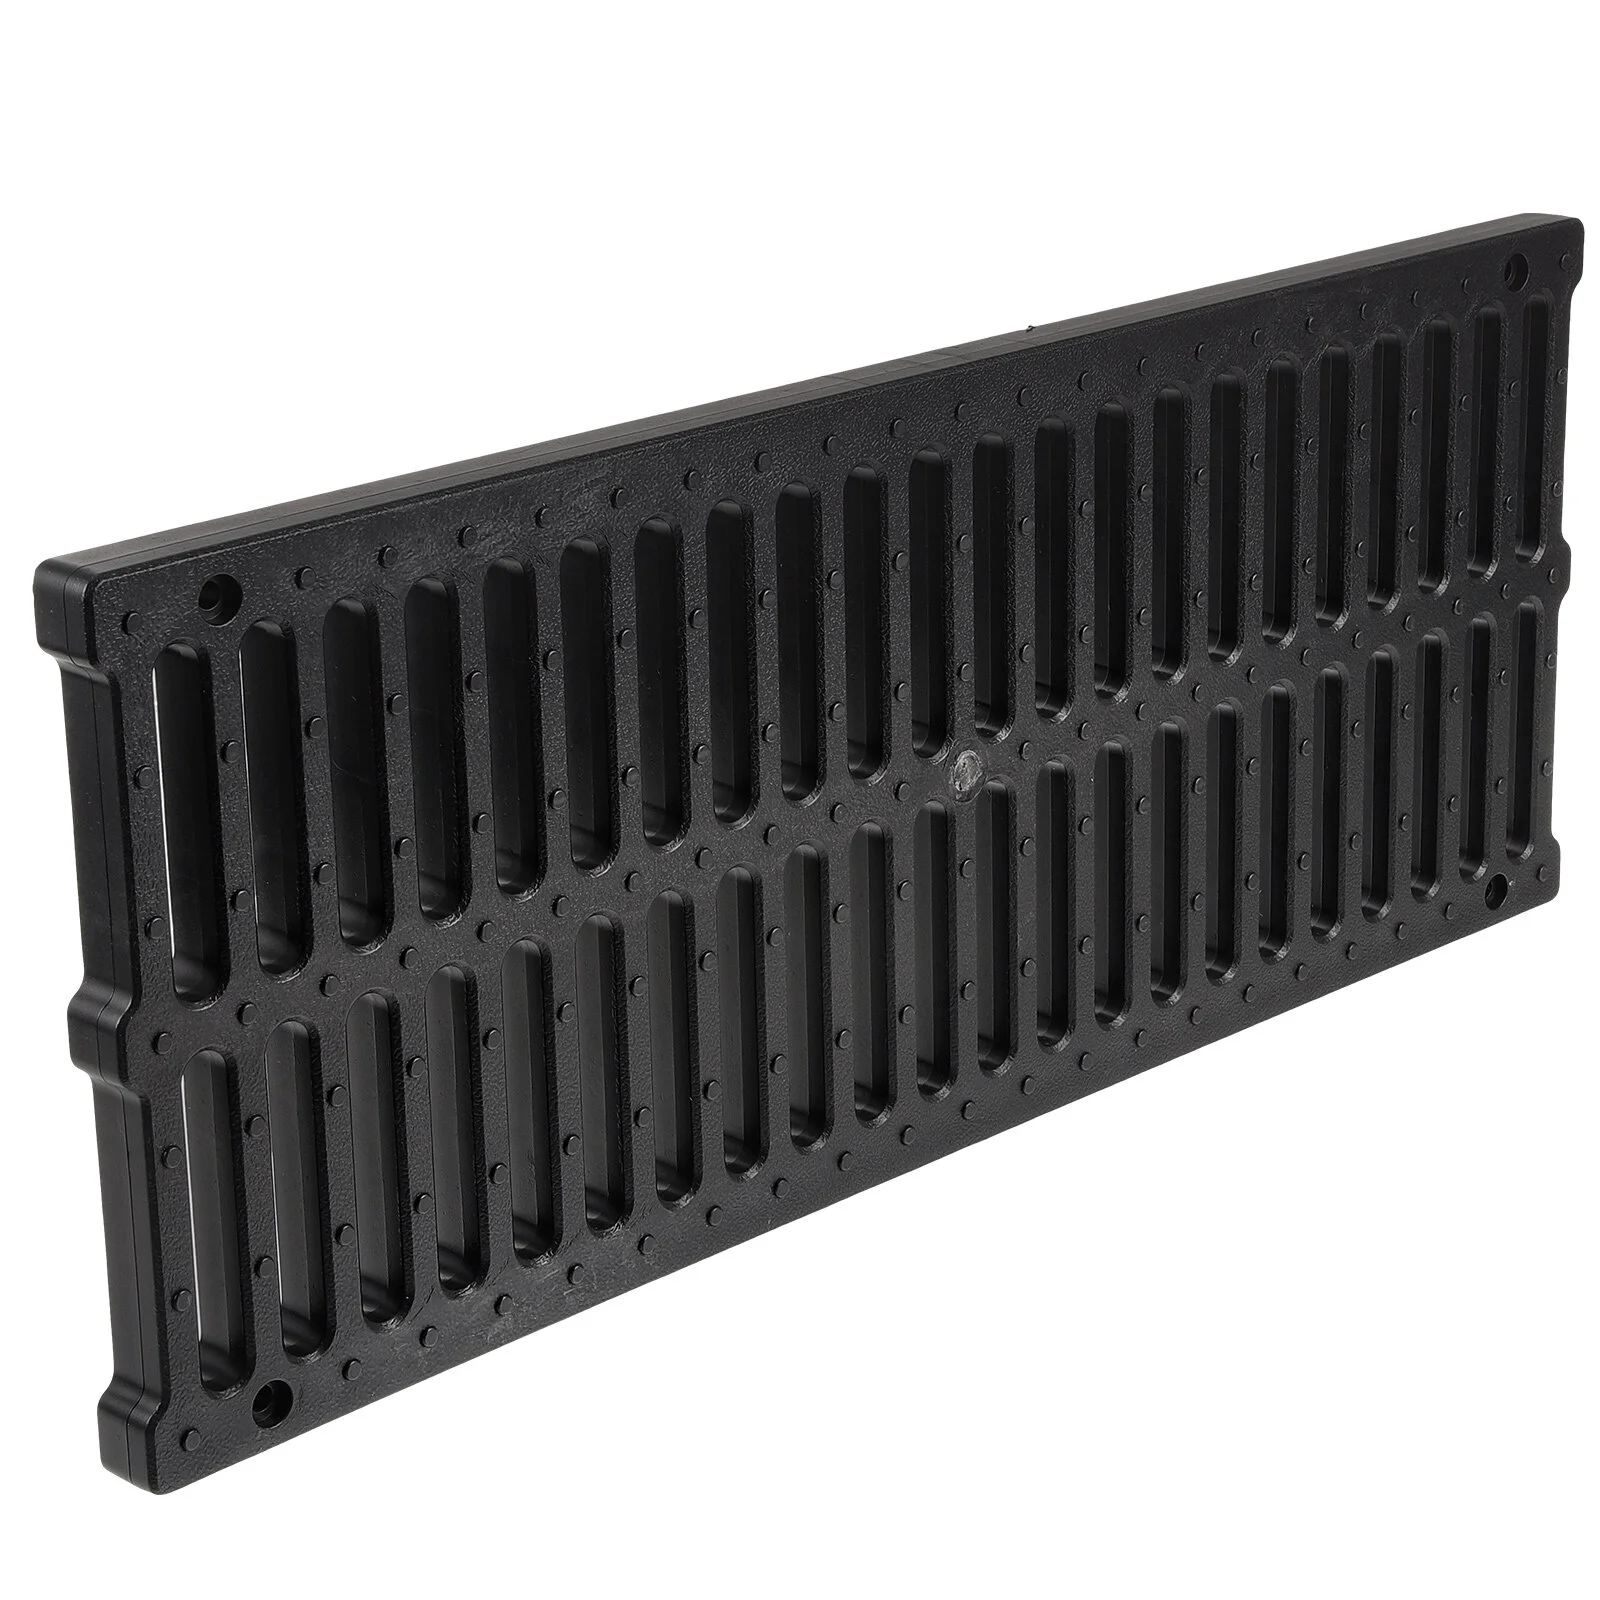 

Trench Cover Drain Grate Restaurant Sewer Replaceable City Sturdy Plastic Supply